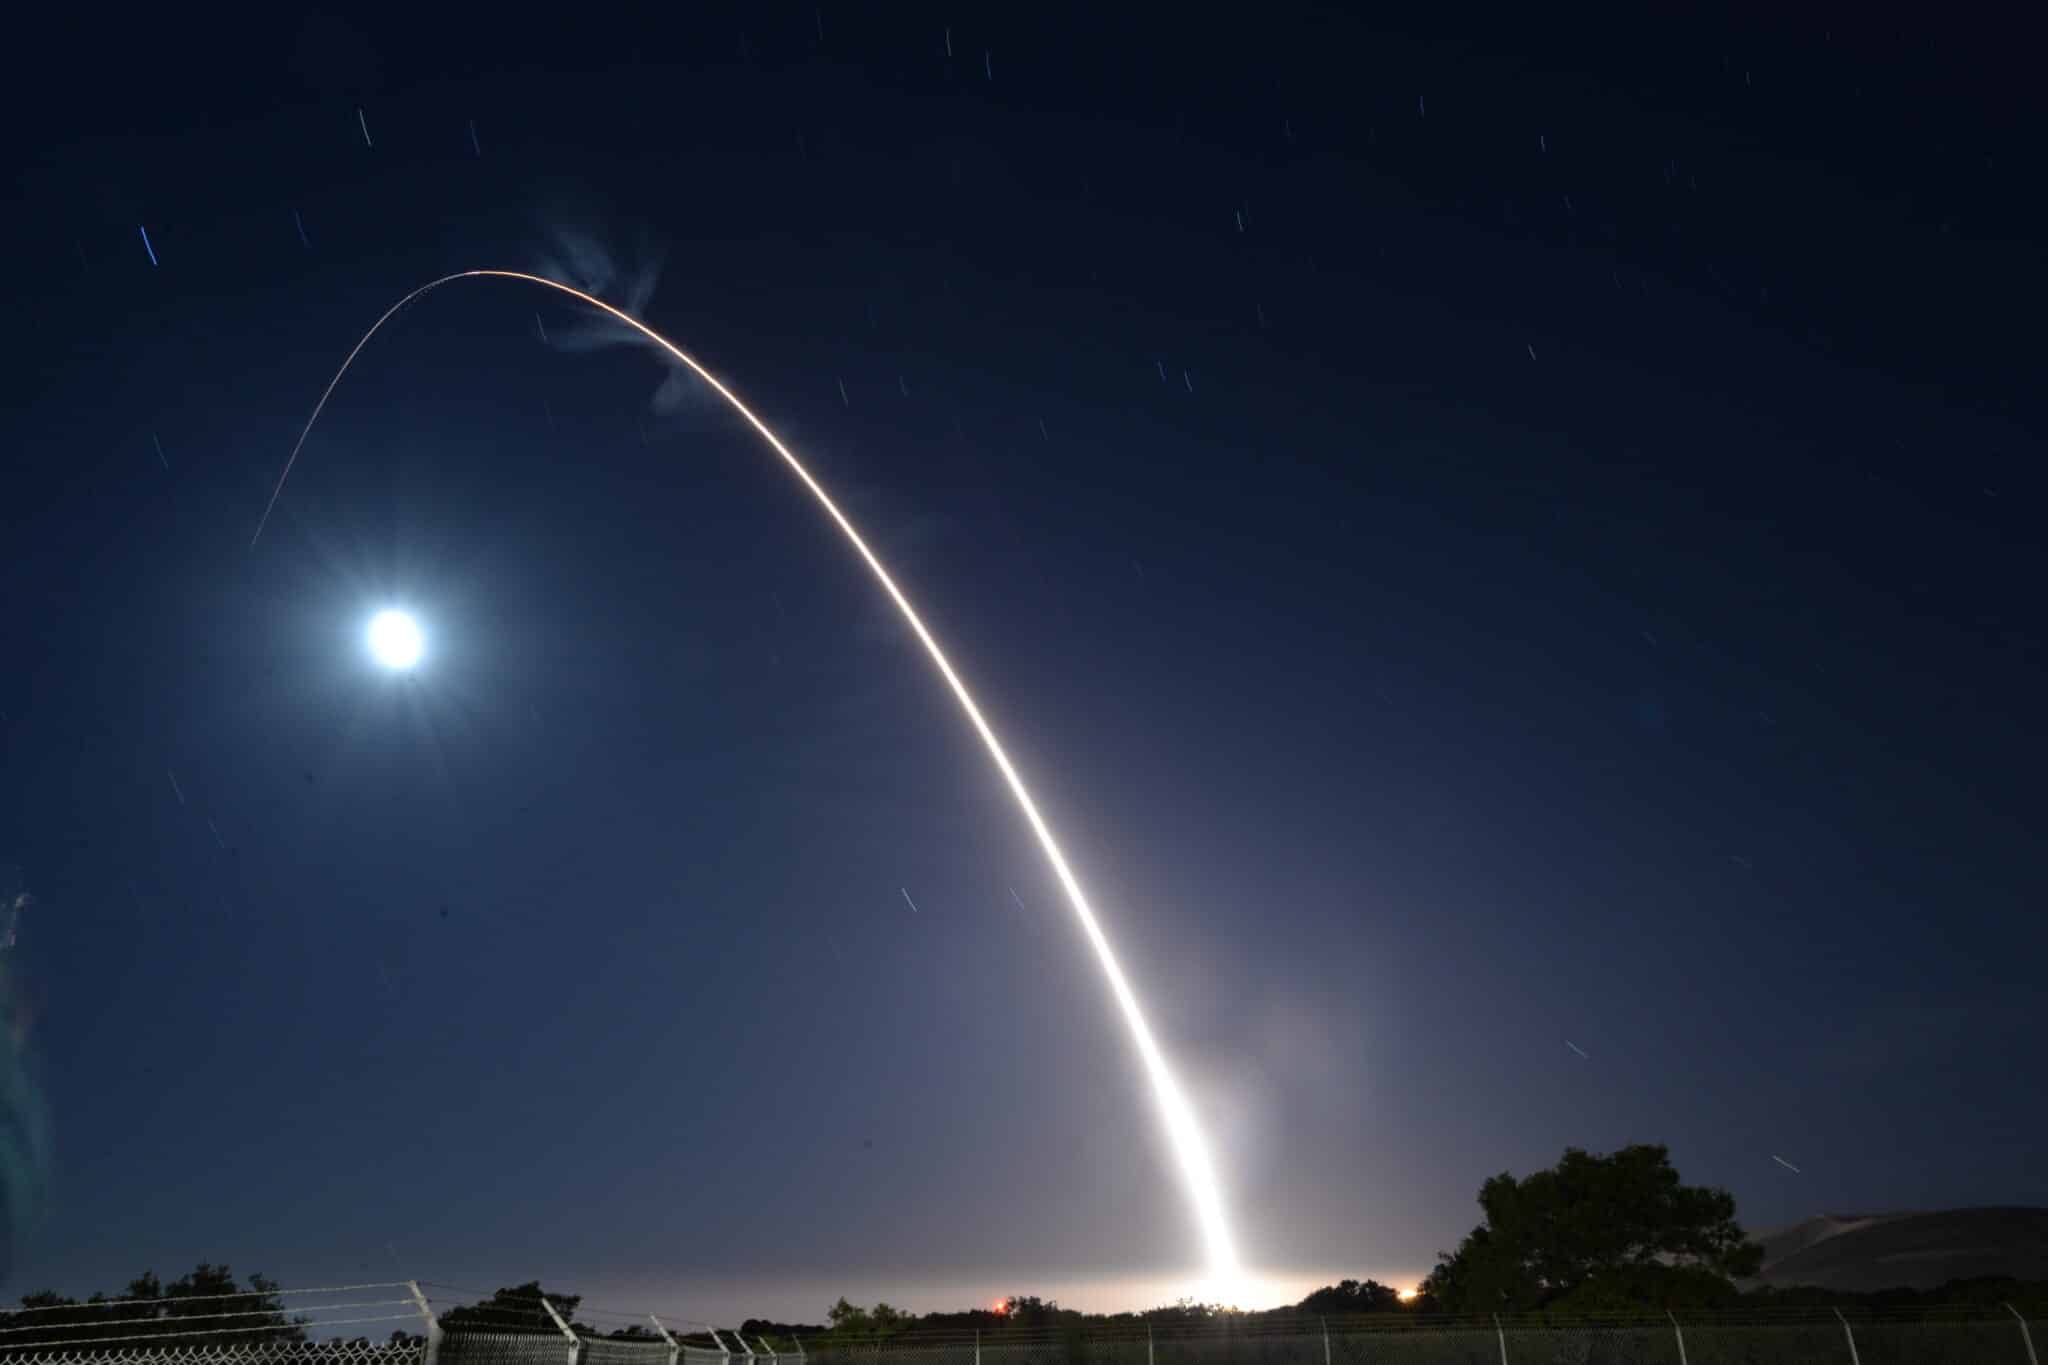 A Minuteman III ICBM missile launches at night with a bright white streak trailing it.